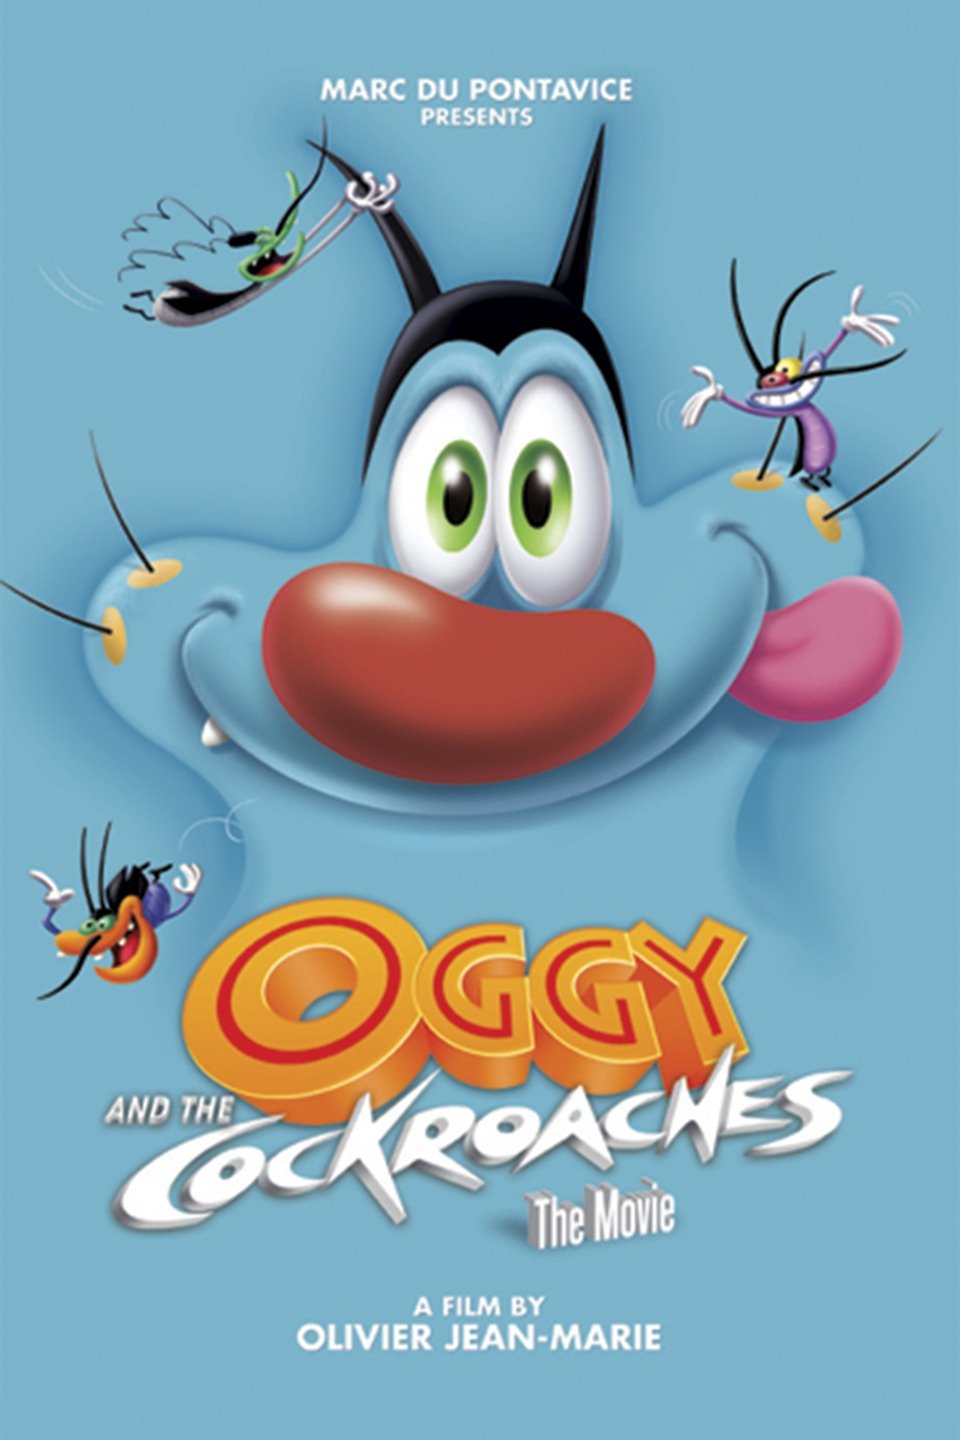 oggy and cockroaches.